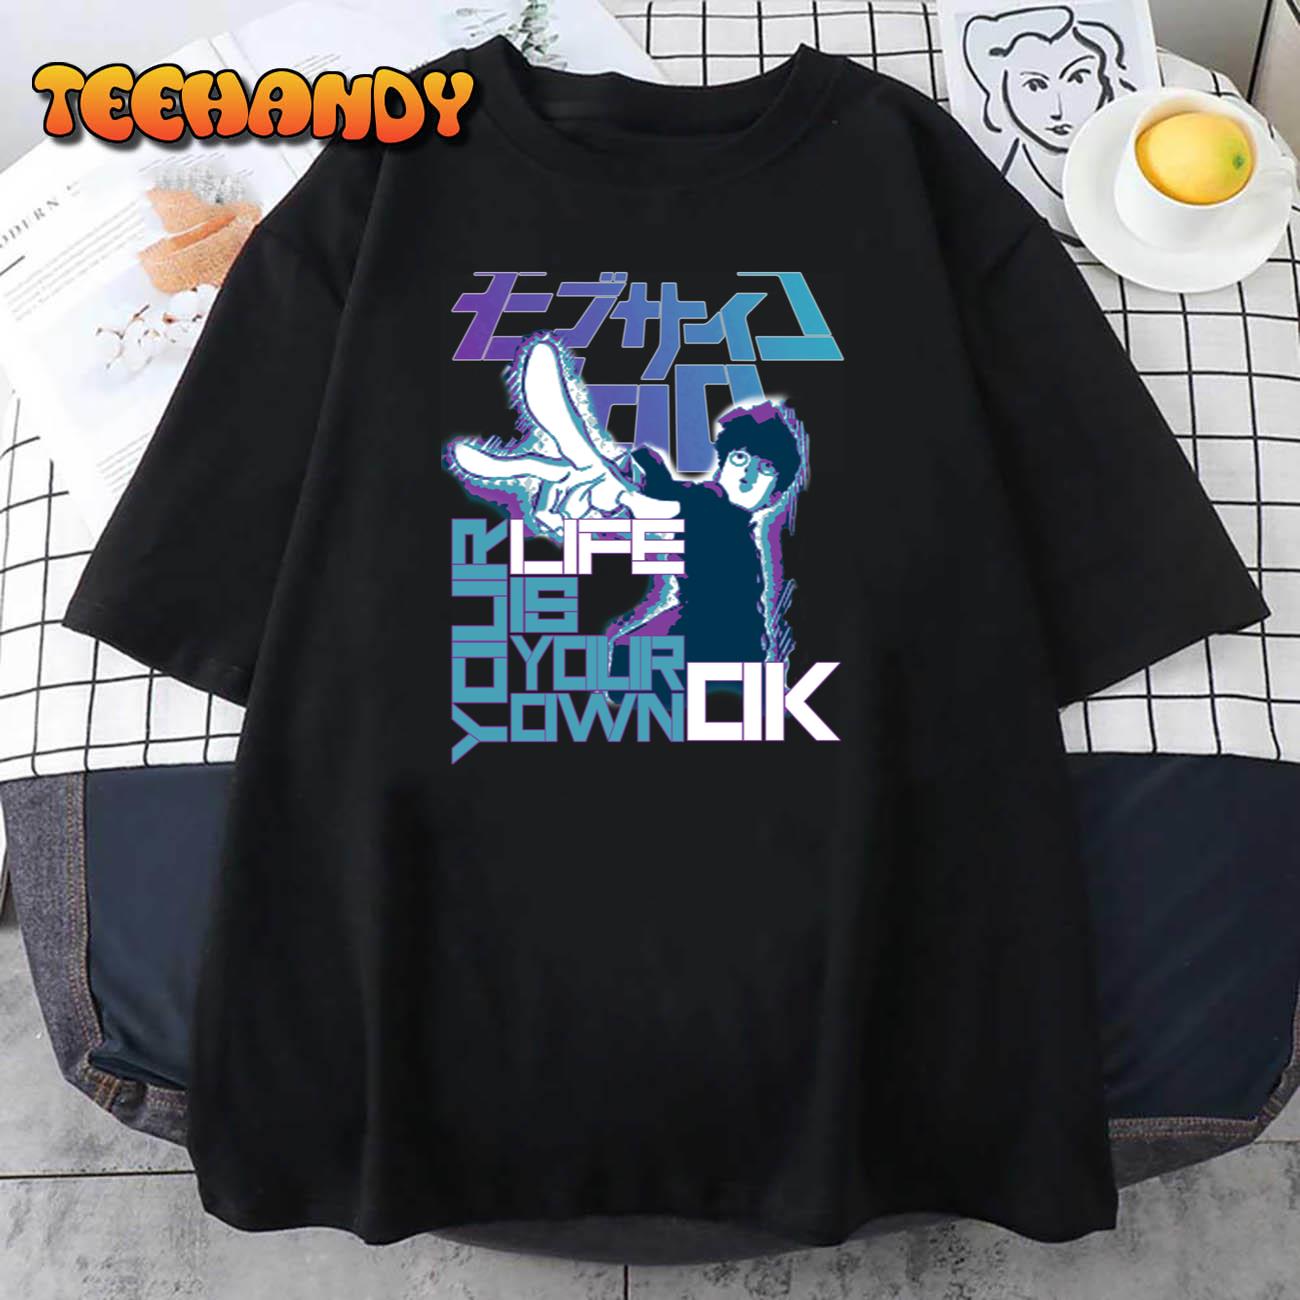 Your Life Is Your Own Ok Mob Psycho 100 Unisex T-Shirt